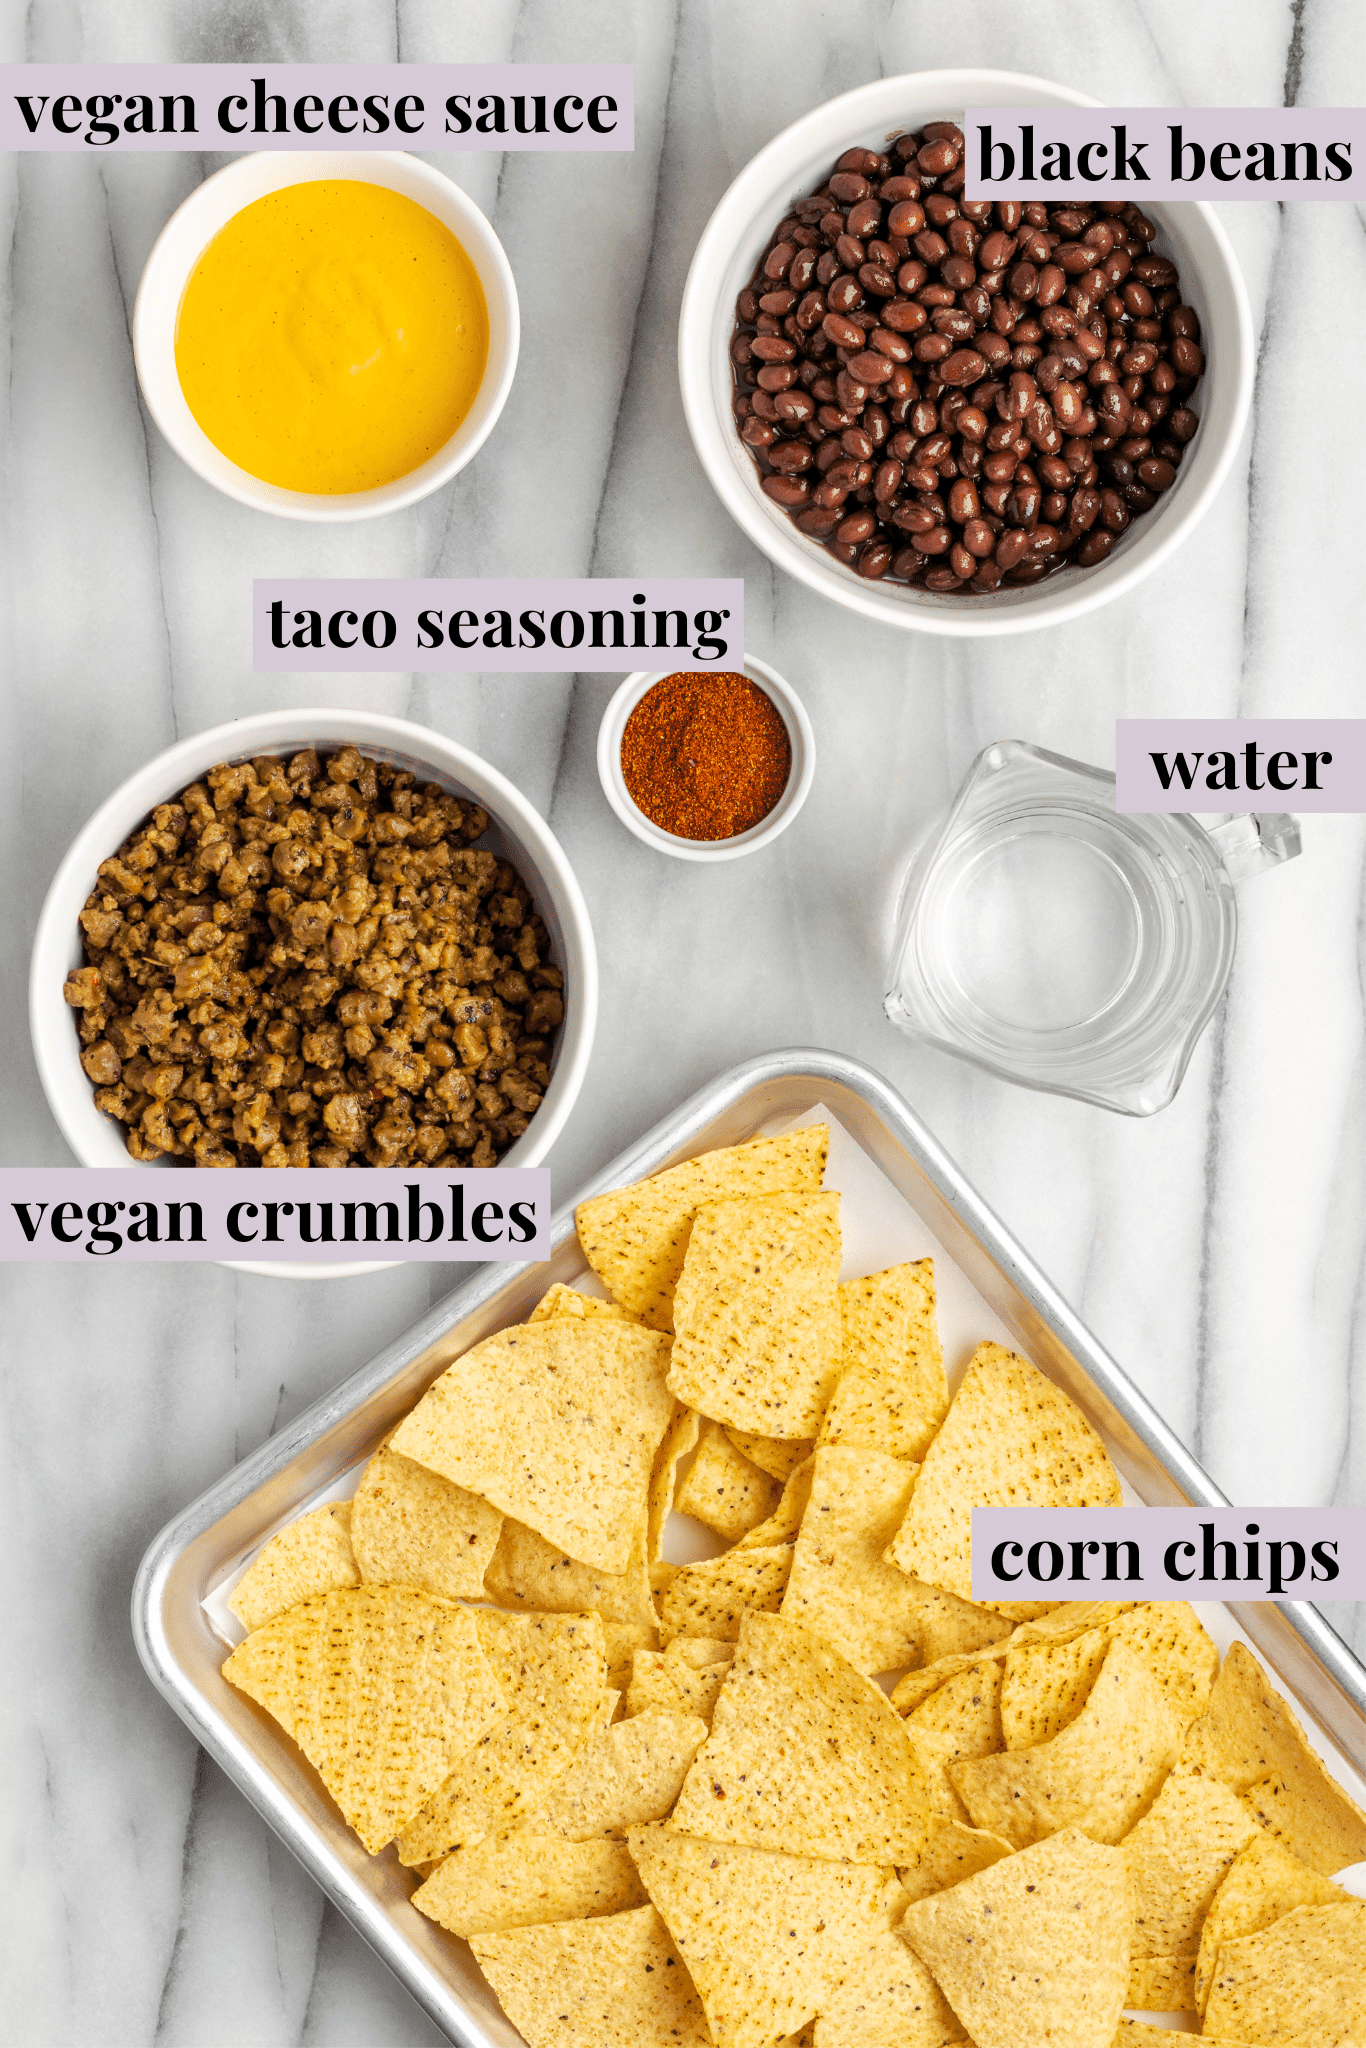 Overhead view of a tray of tortilla chips, a bowl of vegan meat crumble, a bowl of black beans, a bowl of vegan cheese sauce, a bowl of taco seasoning, and a glass of water